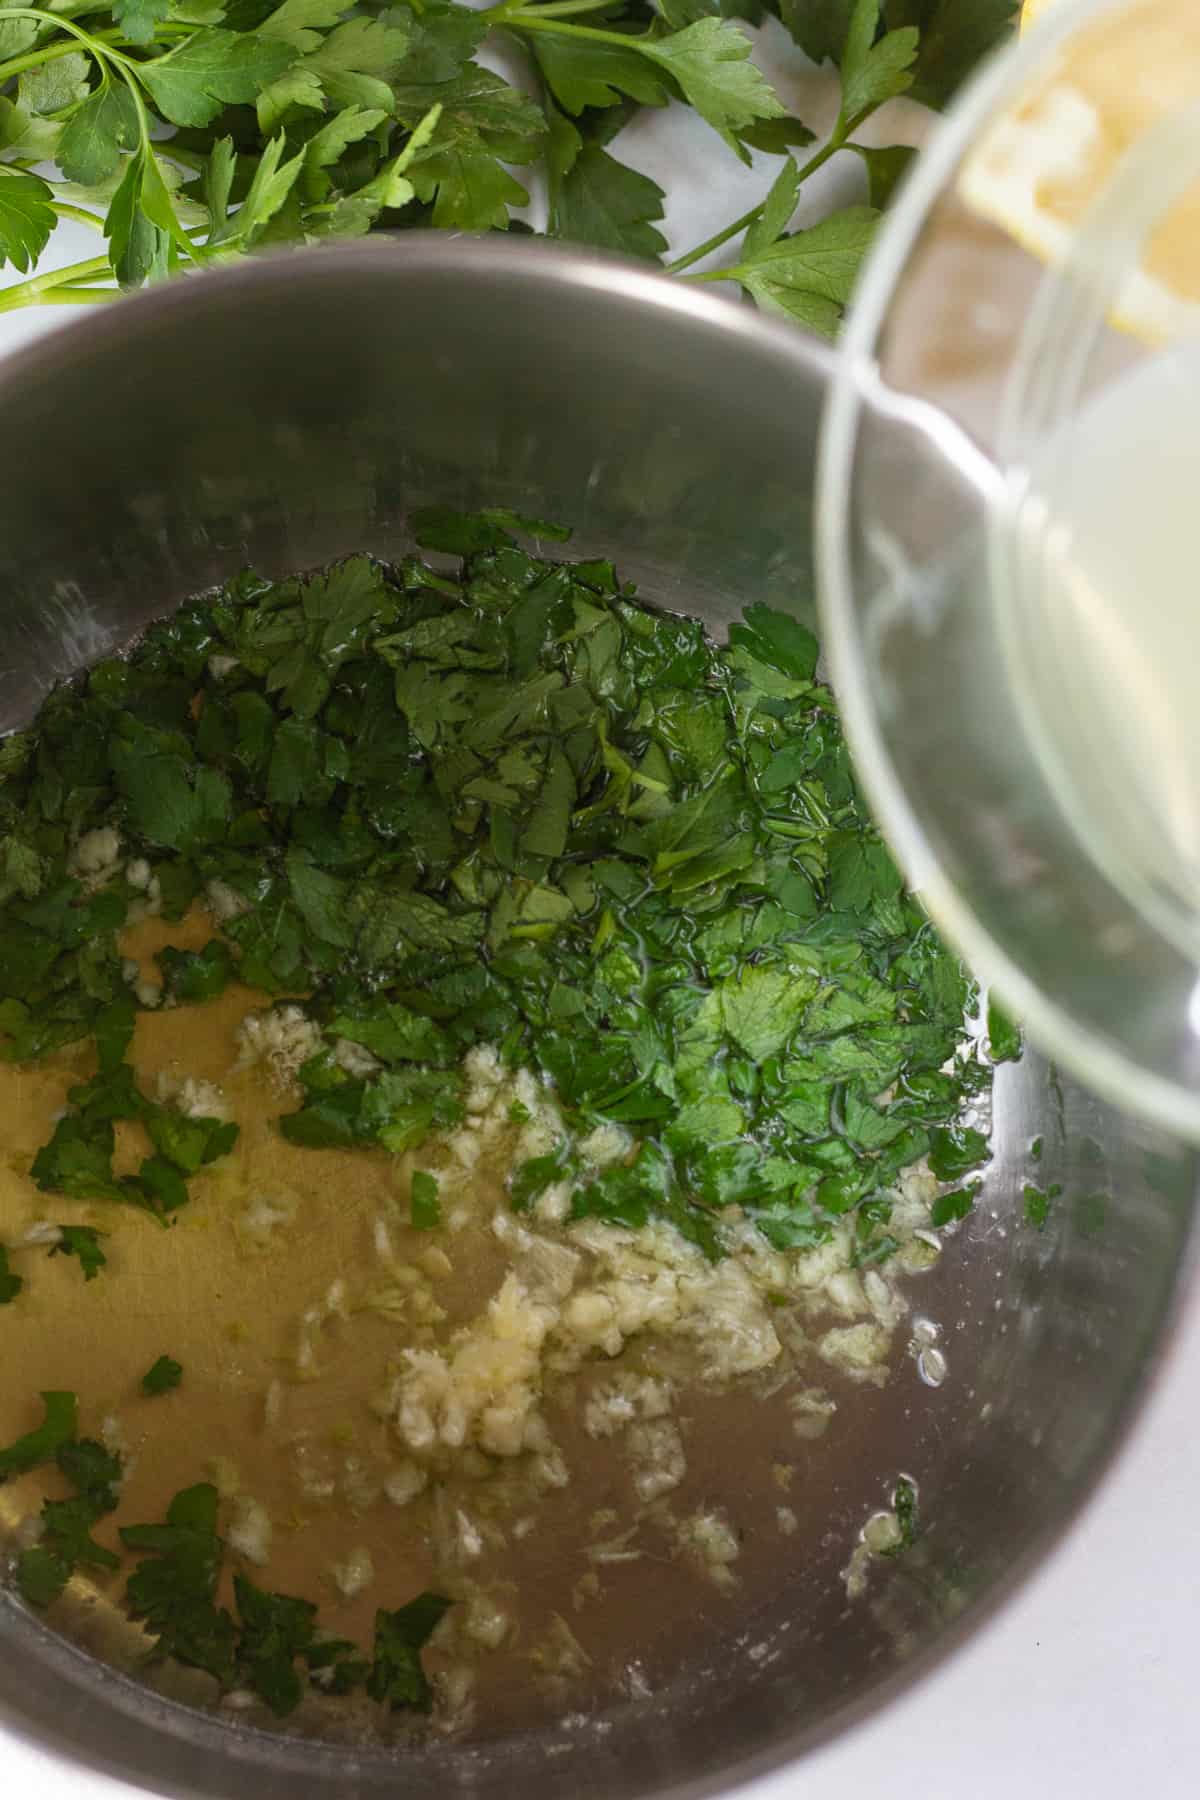 Top down shot of a small saucepan with ghee, chopped parsley, and minced garlic in it. Lemon juice is about to be poured from above out of a clear small dish.